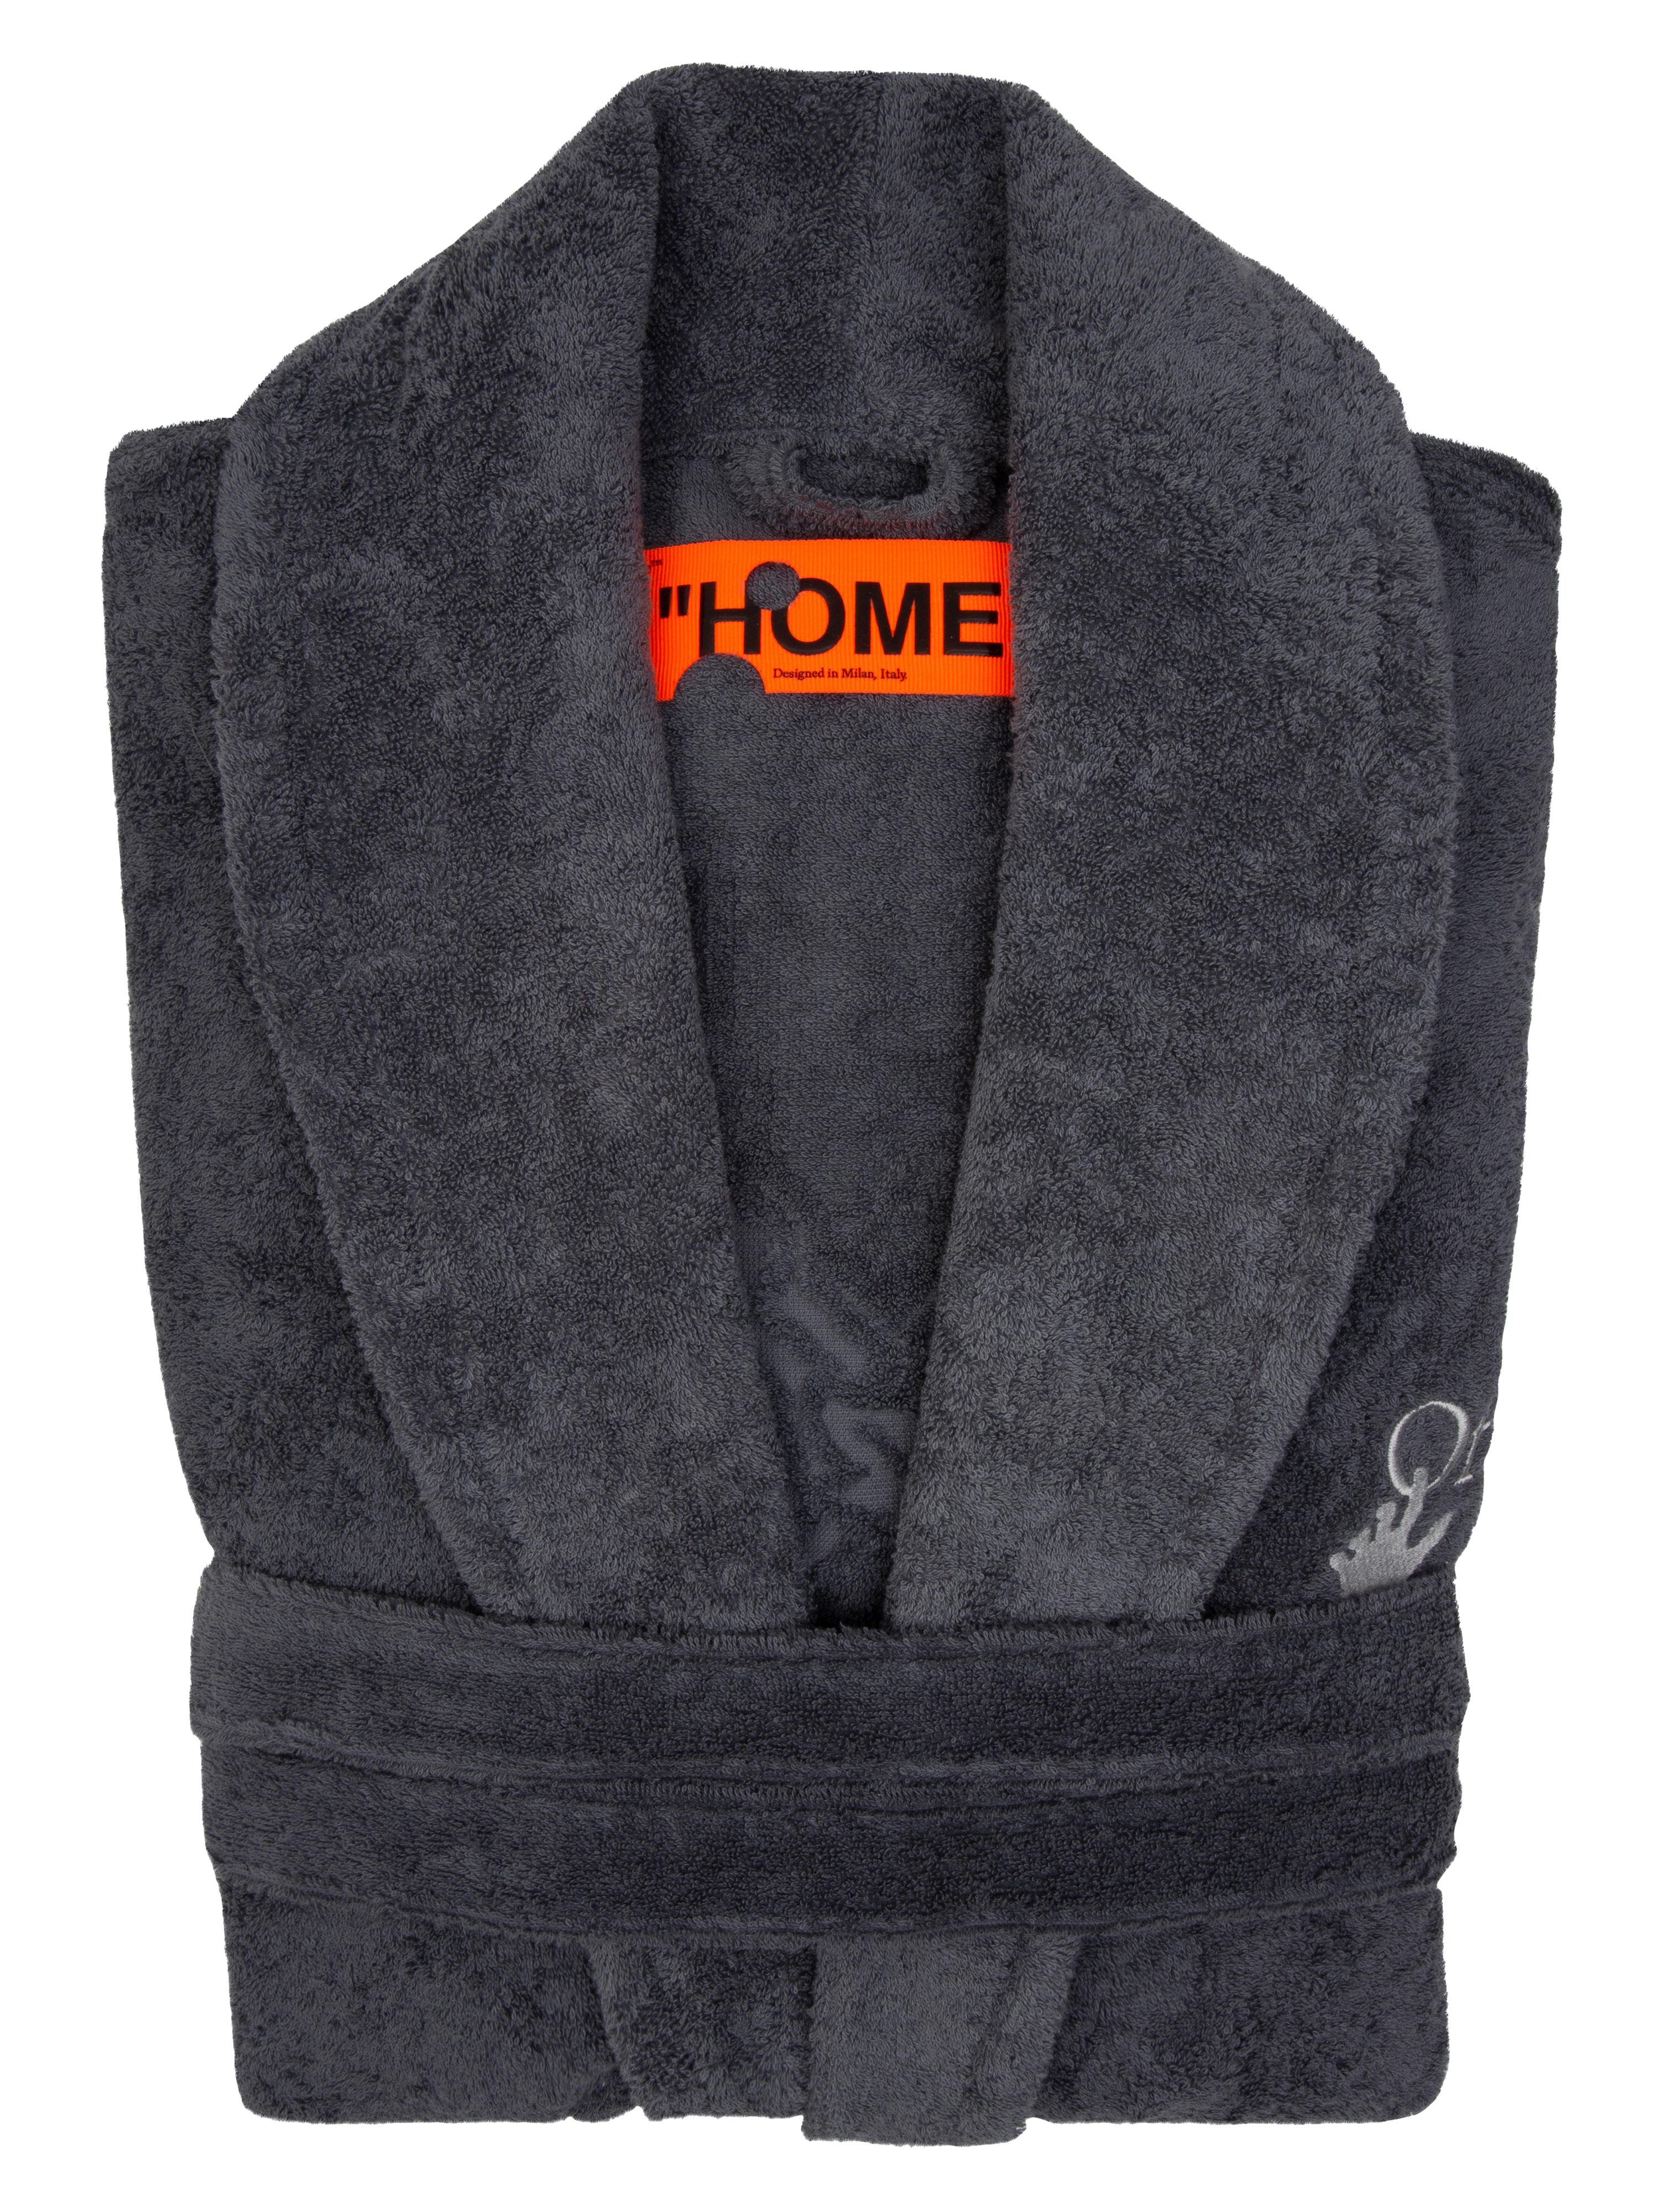 Grey bathrobe with jacquard leaves arrows on the back. Off-hand logo embroiedered on chest, and orange “HOME” label on the inside.
By Virgil Abloh
Dimensions: 135 W x 65 H
This item is only available to be purchased and shipped to the United